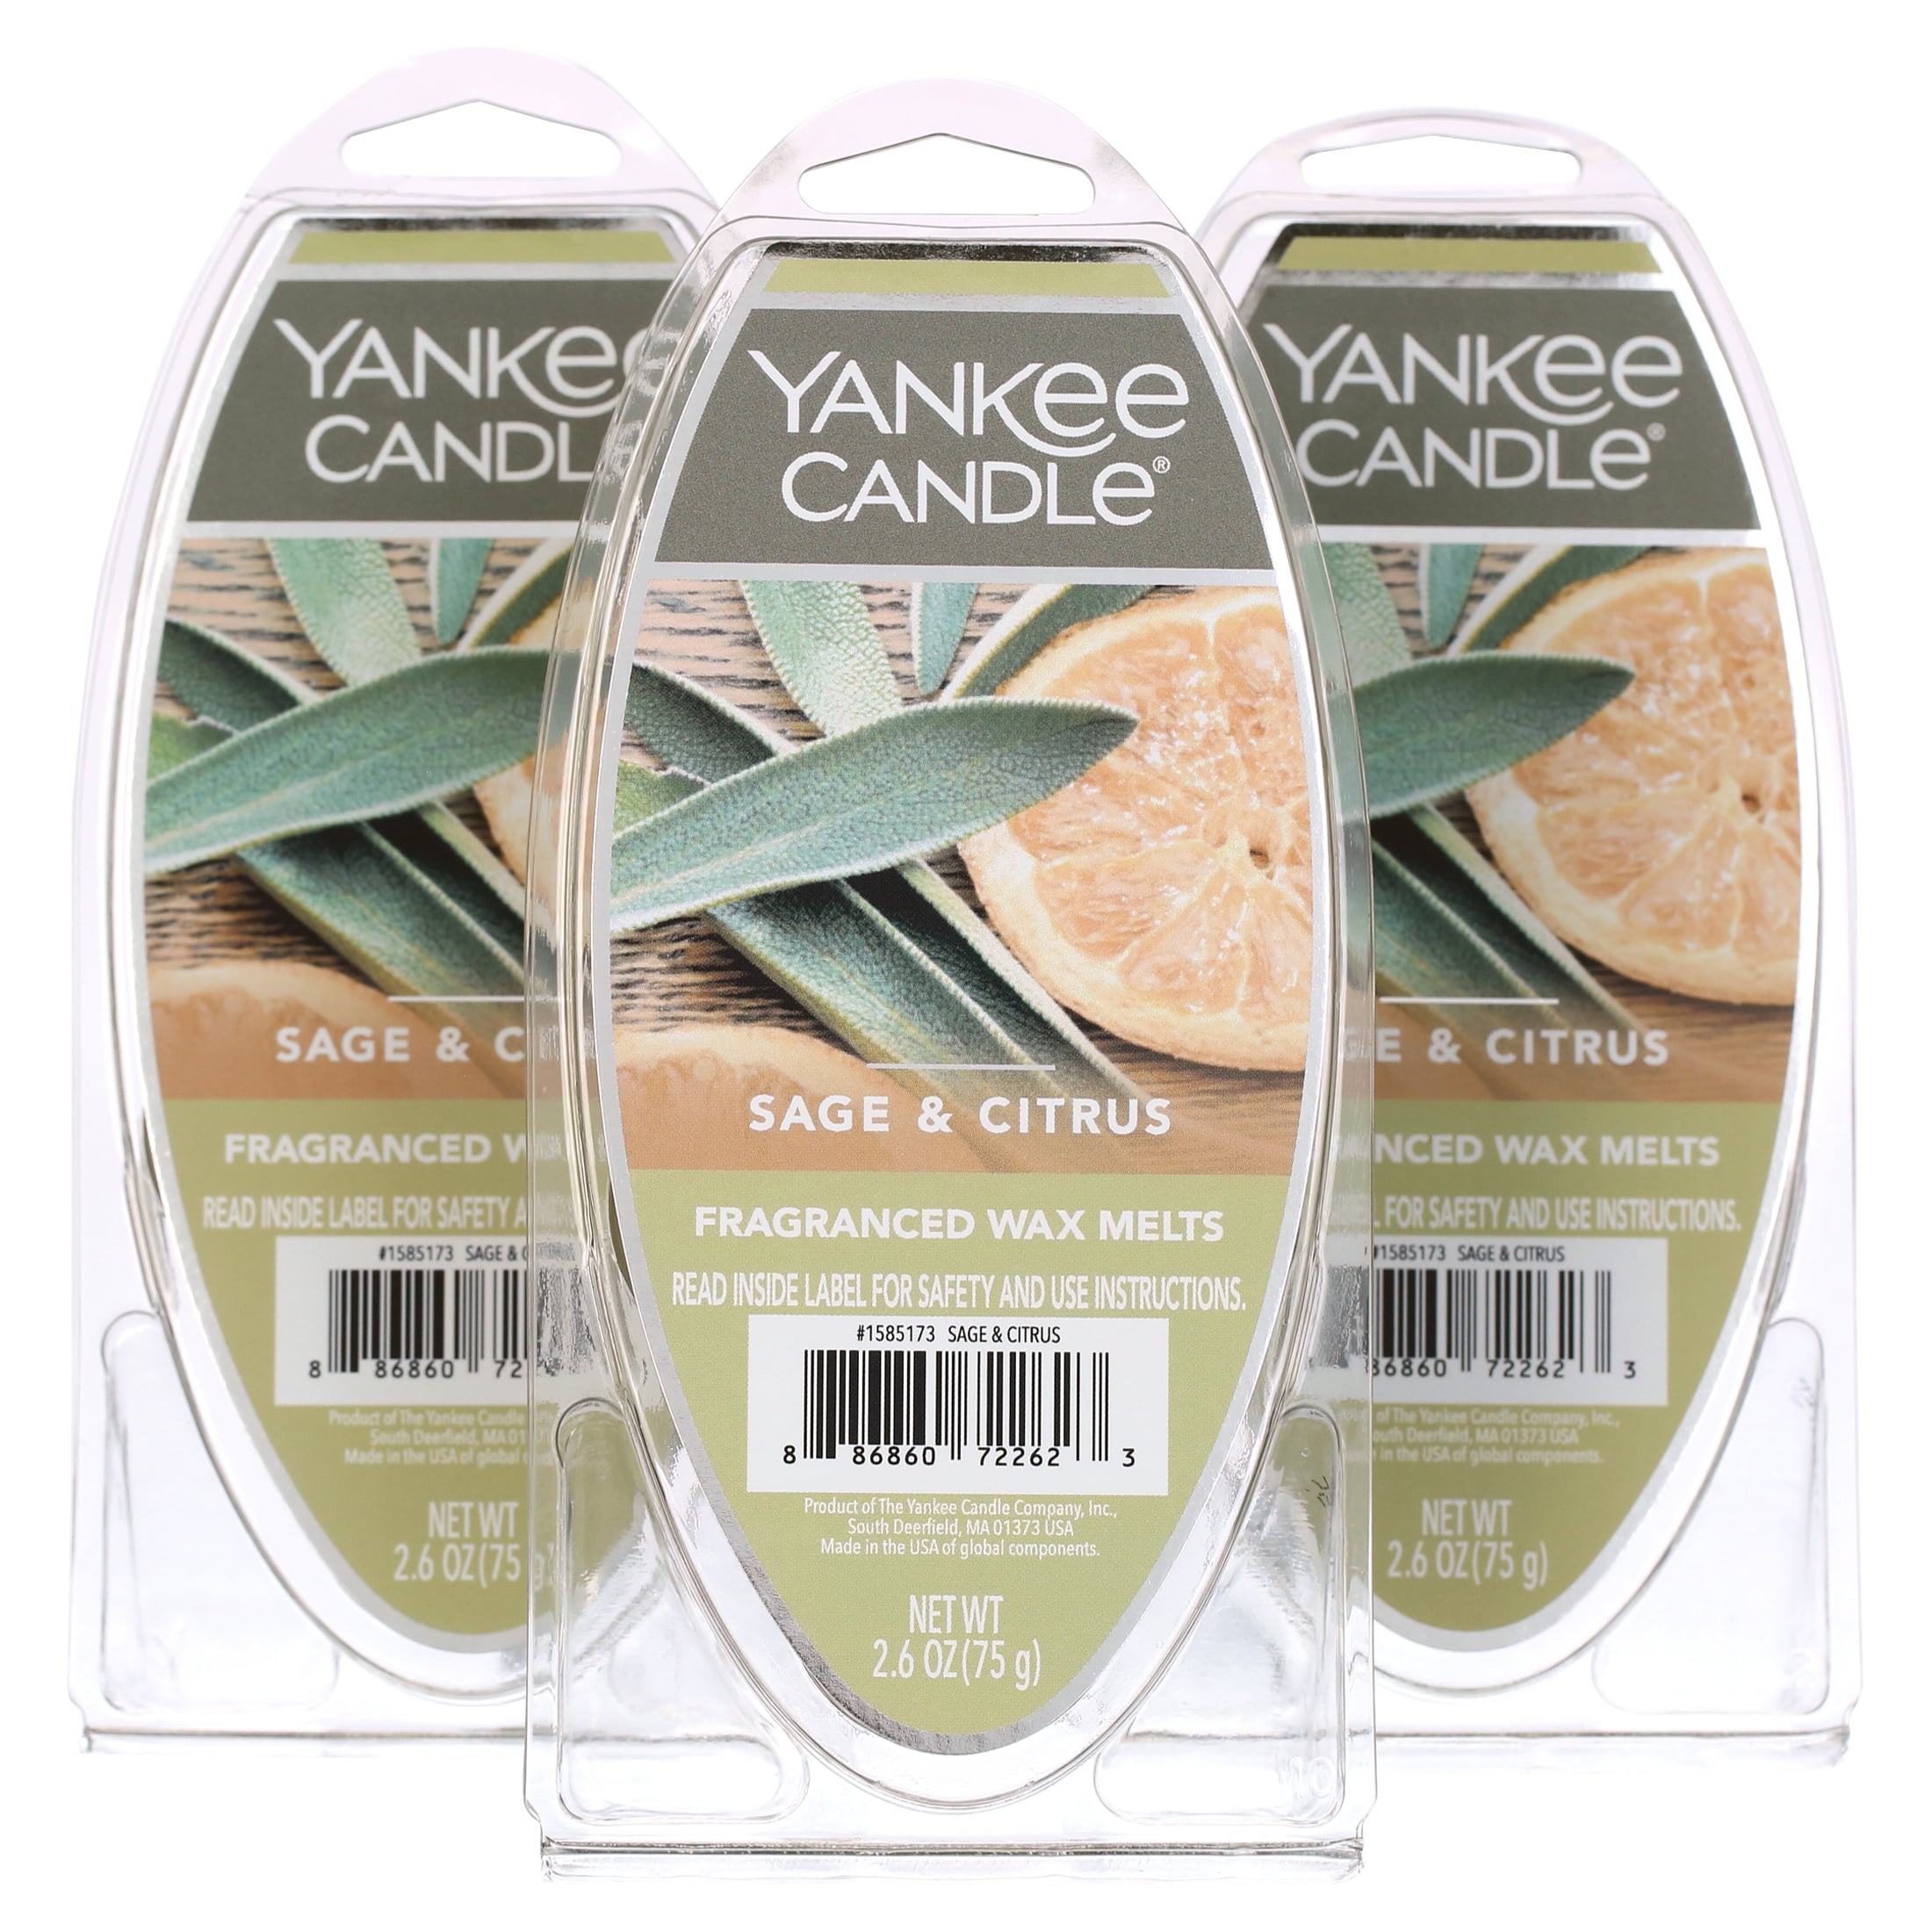 Yankee Candle Classic Wax Melt Collection, Homefront Giftware & Interiors